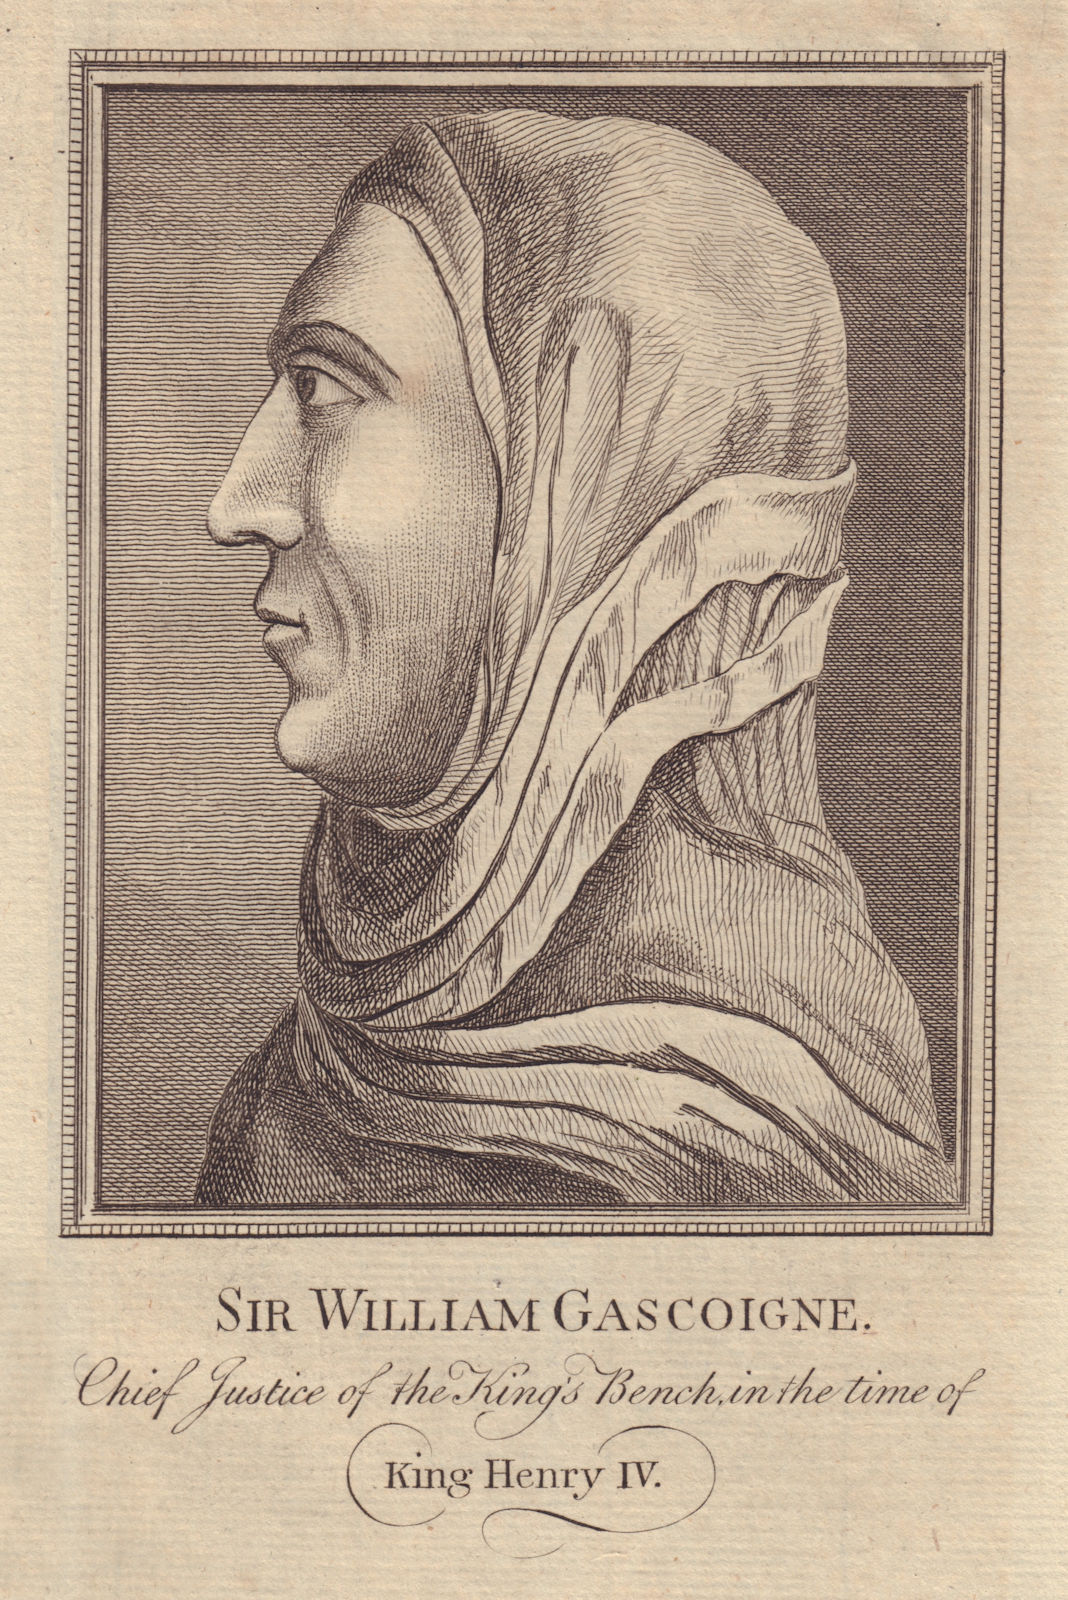 Associate Product Sir William Gascoigne, Chief Justice of England, reign of King Henry IV 1781